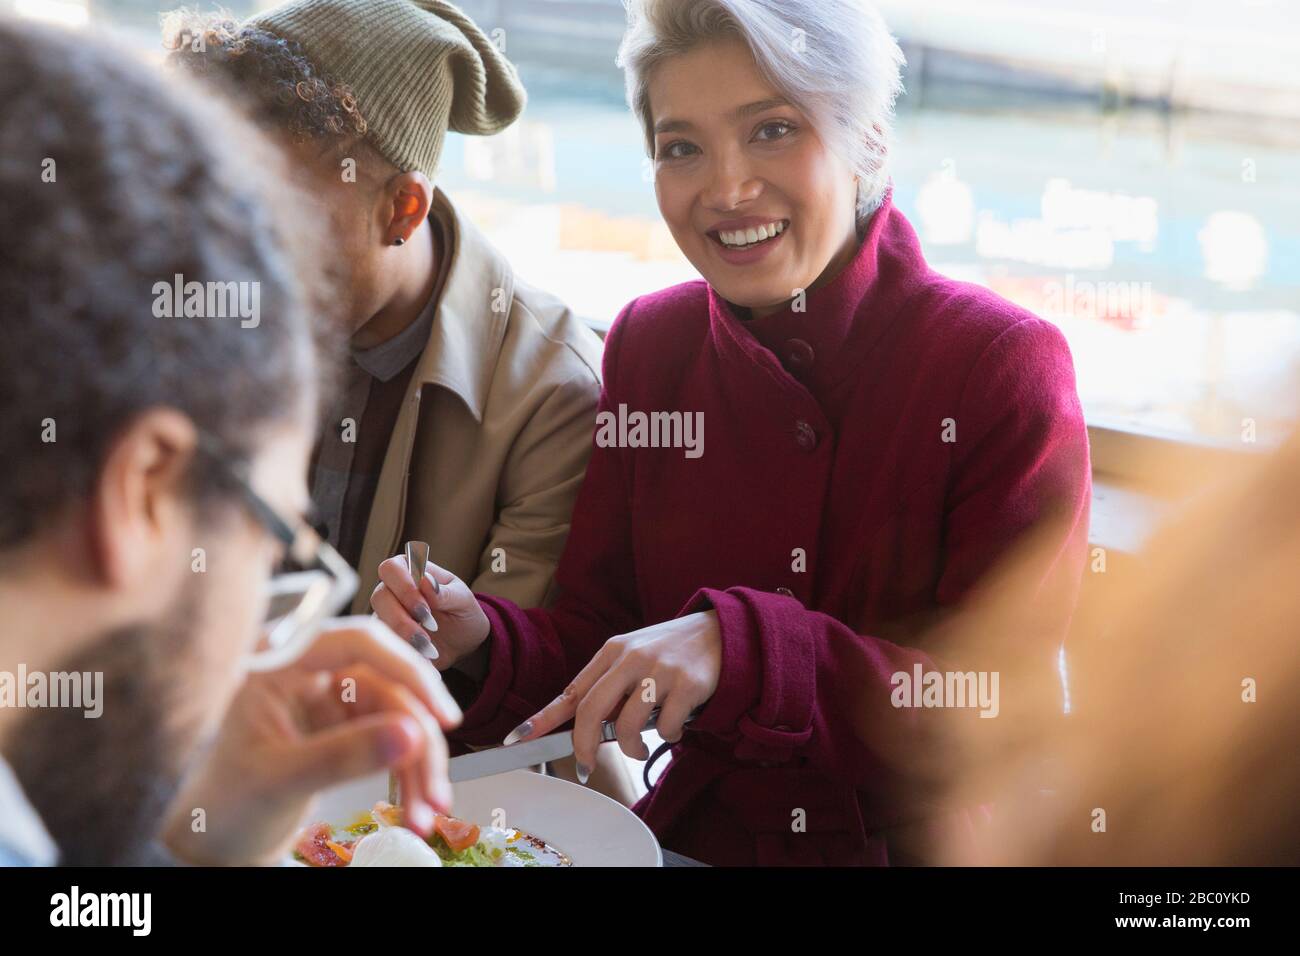 Portrait smiling young woman eating with friends at restaurant Stock Photo